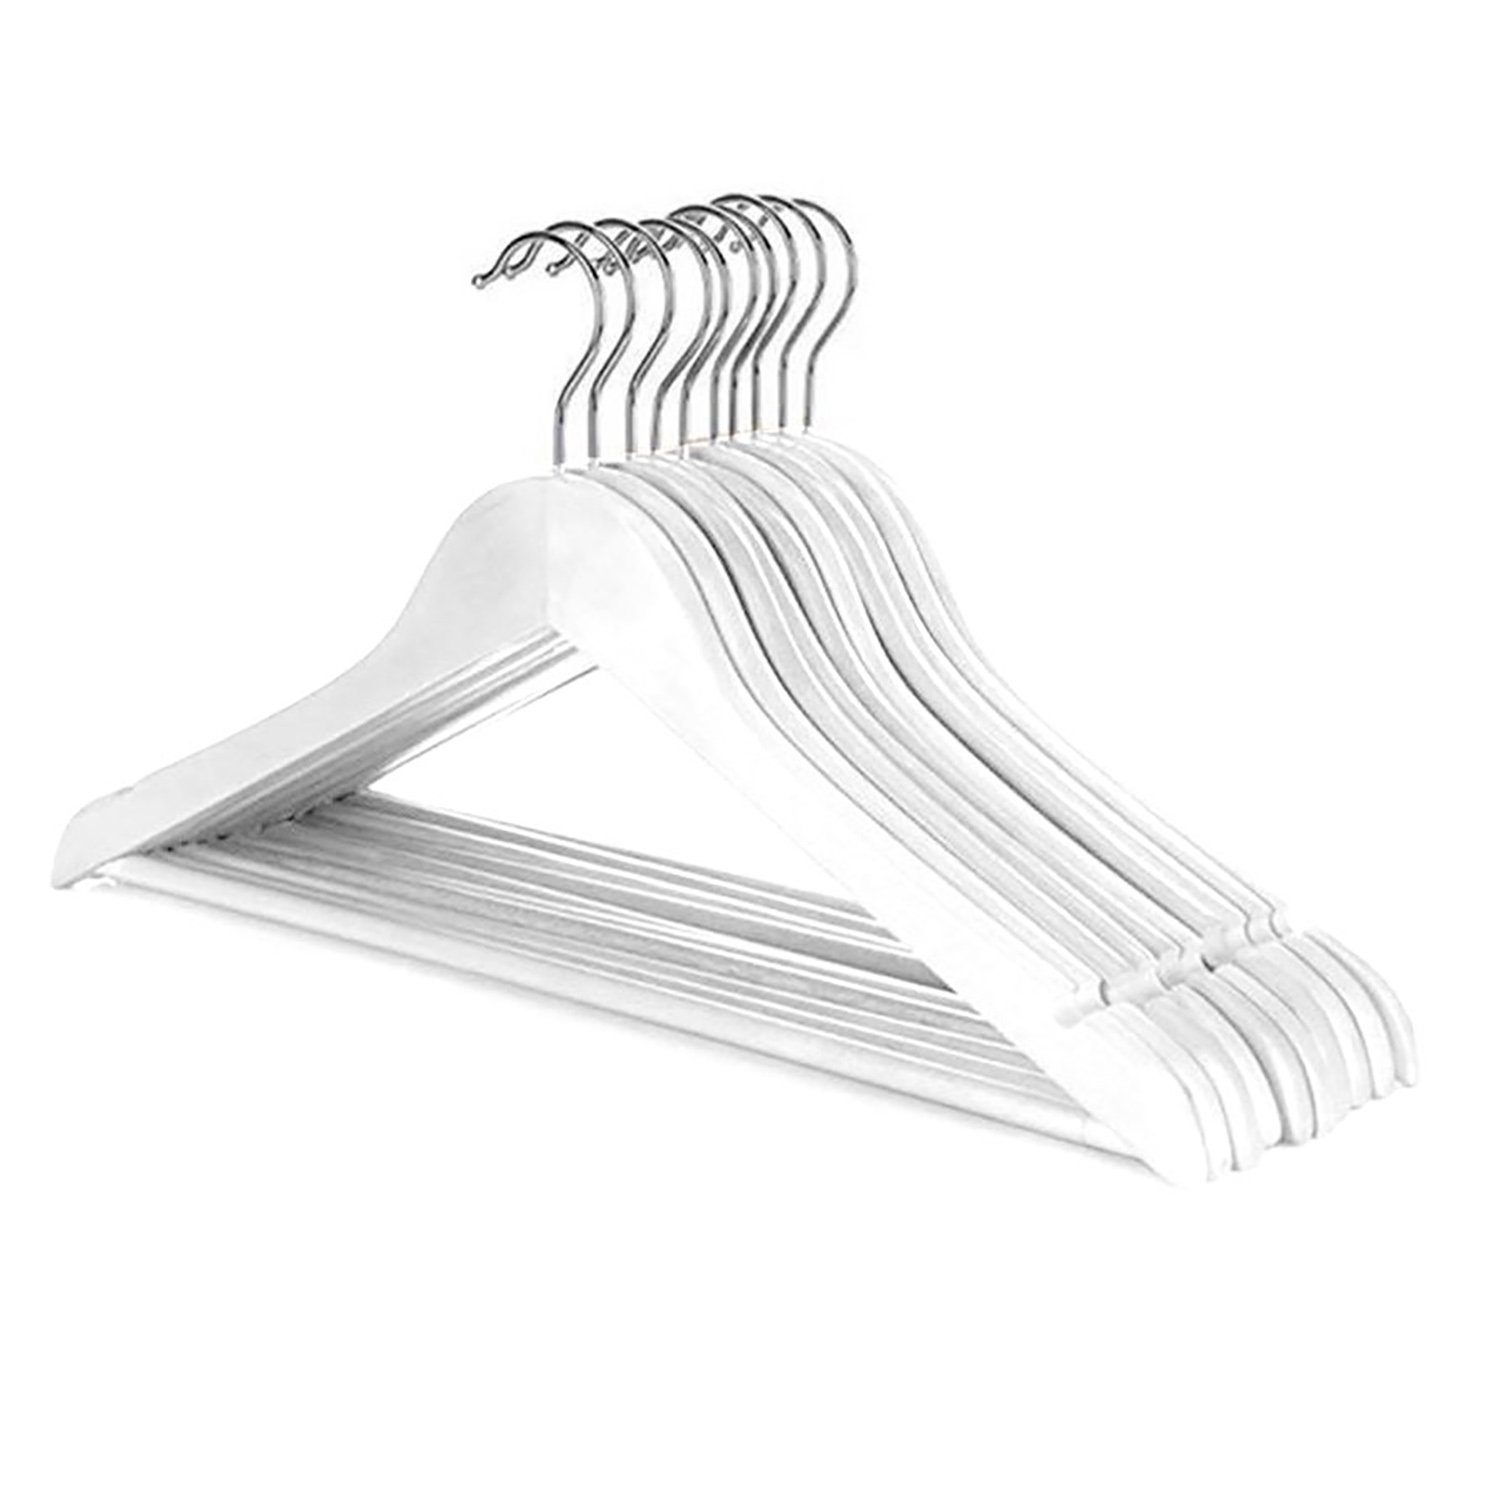 Harbour Housewares Metal Wire Coat  Clothes Hangers  Trouser Bar   Notches  Chrome  Pack of 10  Catchcomau